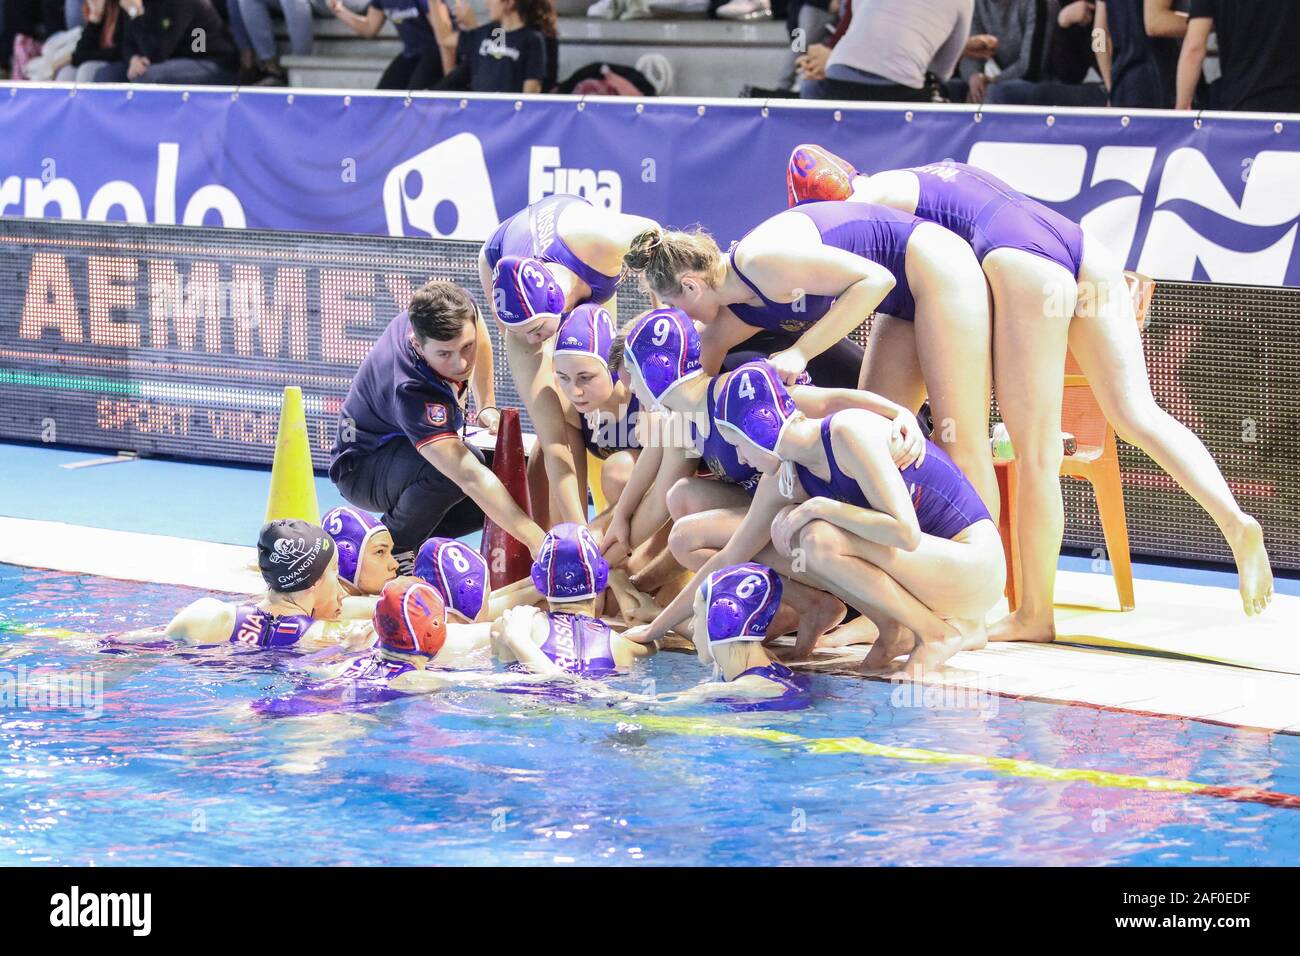 Roma, Italy, 11 Dec 2019, russia during WaterPolo World League Women - Italy vs Russia - Waterpolo Italian National Team - Credit: LPS/Simona Scarano/Alamy Live News Stock Photo